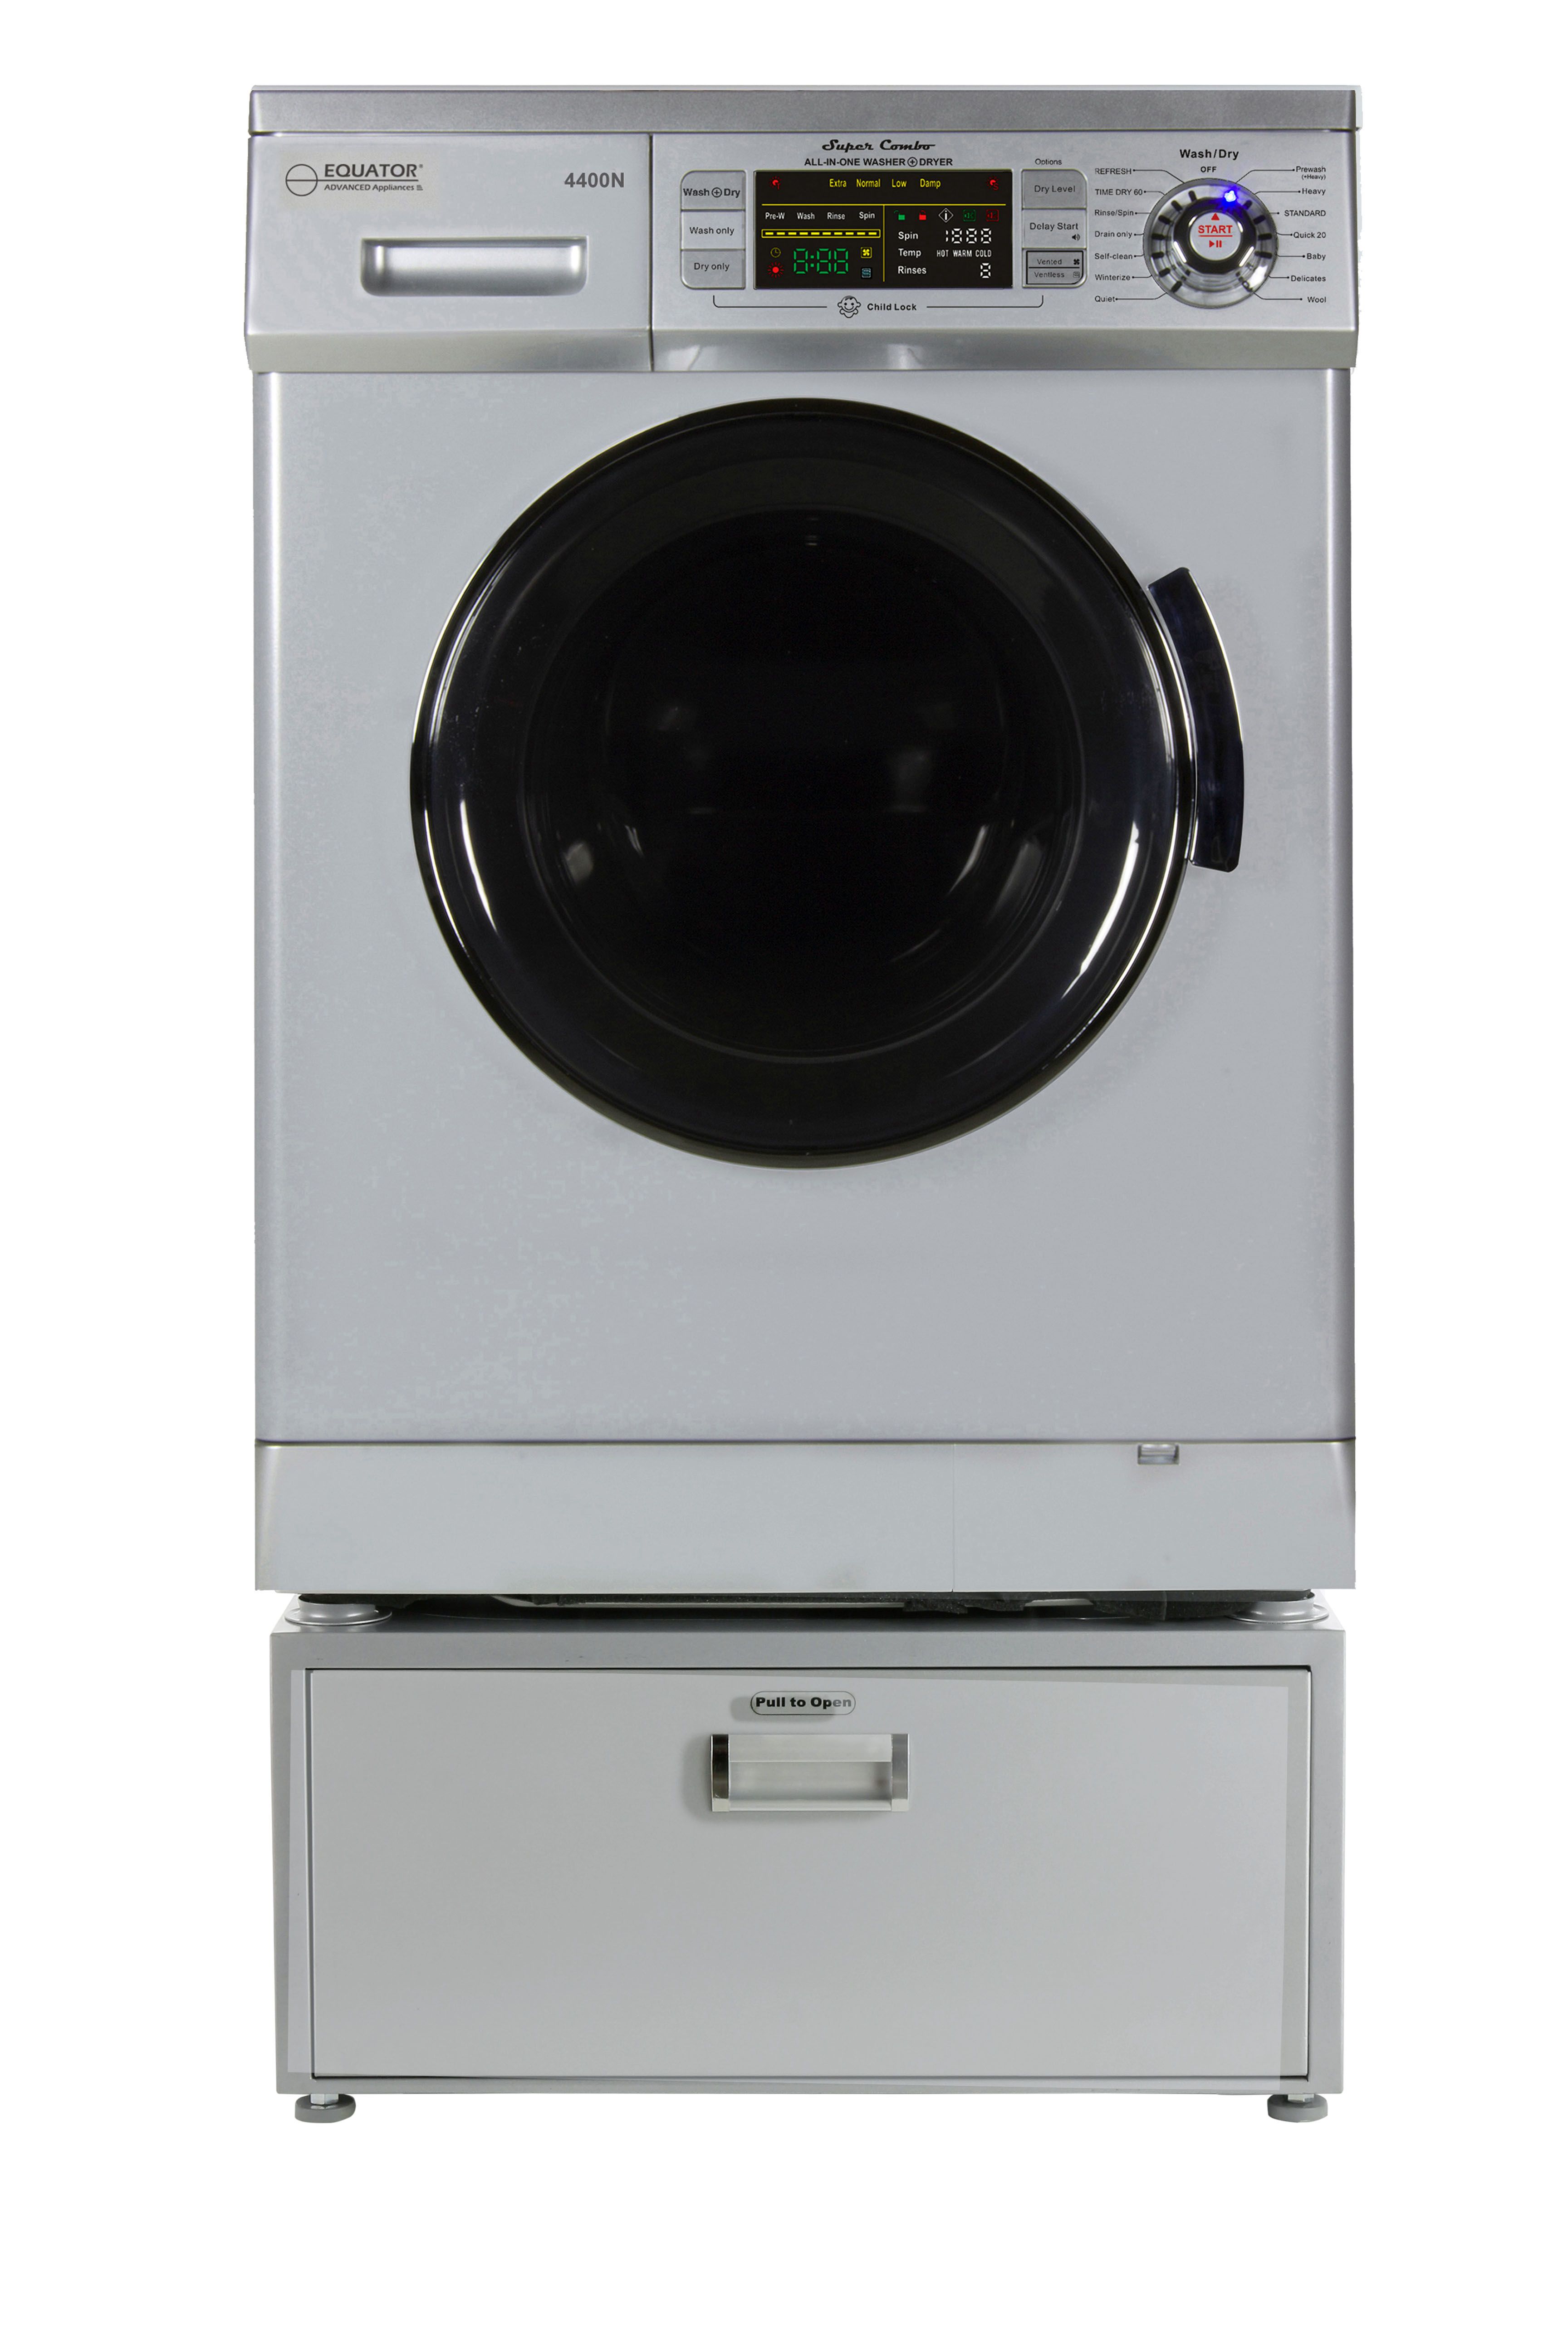 Equator EZ 4400 N + Pedestal Silver New Version Compact Combination Washer & Dryer in Silver with Pedestal, 2019 Model